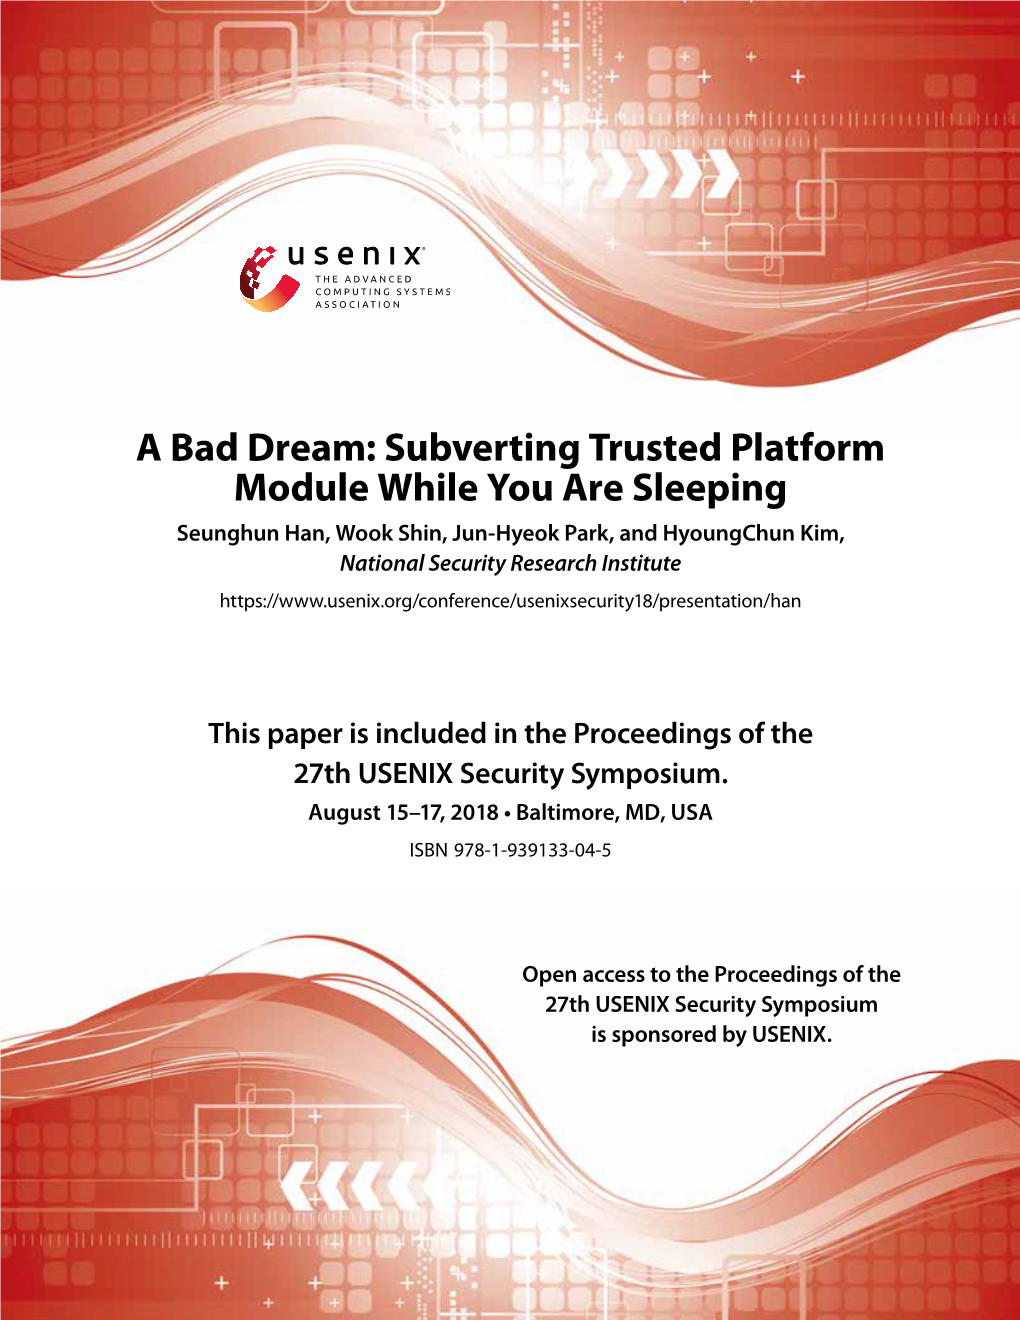 Subverting Trusted Platform Module While You Are Sleeping